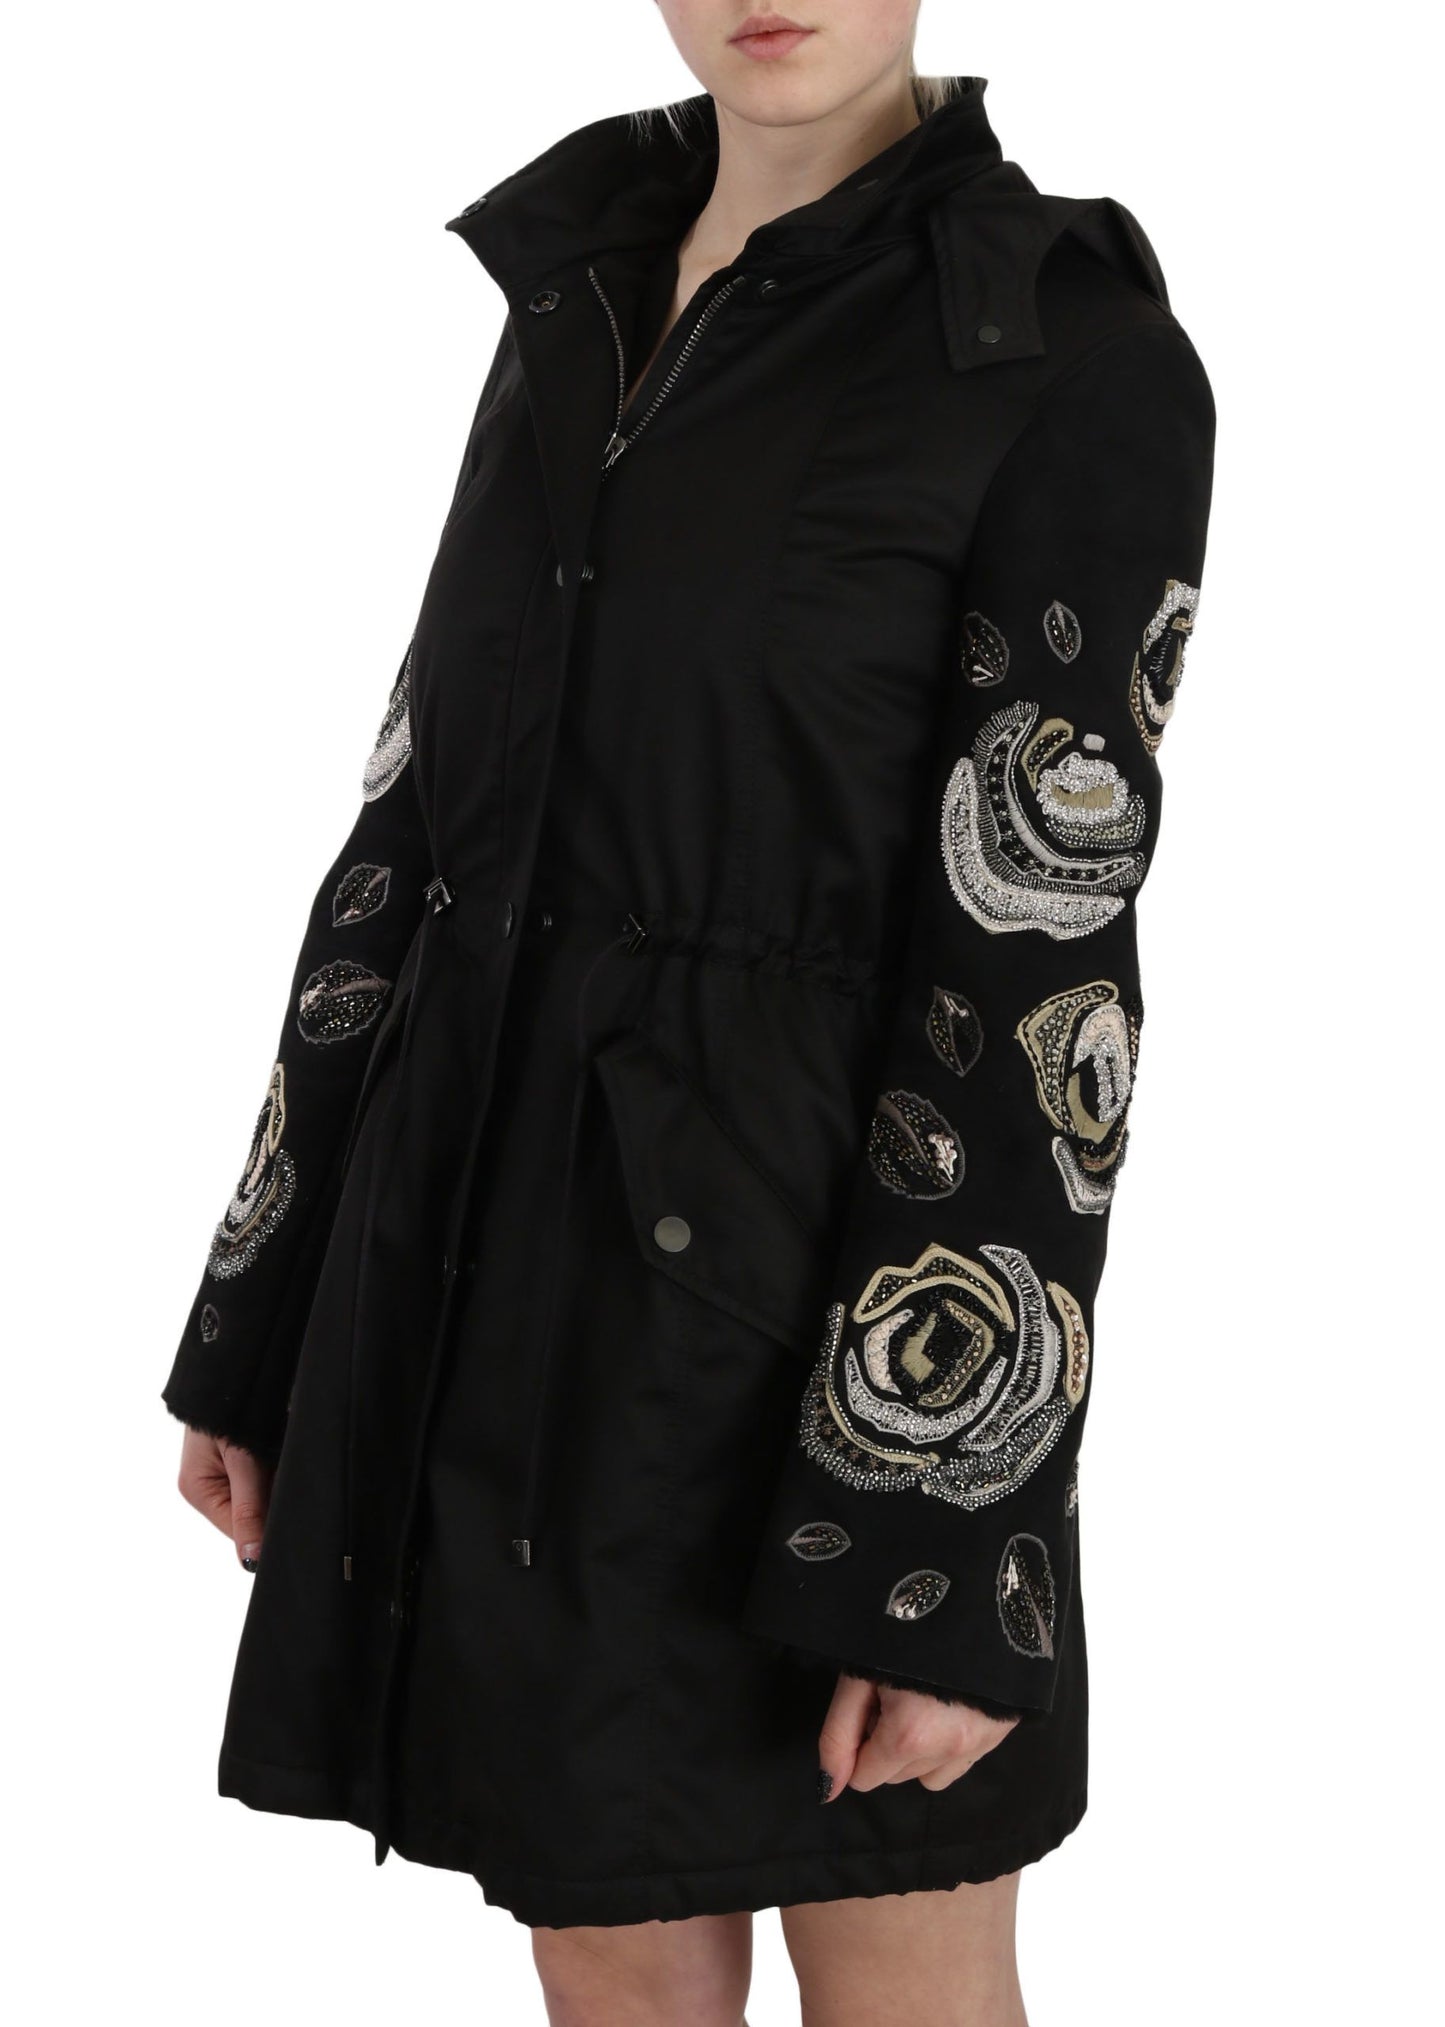 Floral Sequined Beaded Hooded Jacket Coat